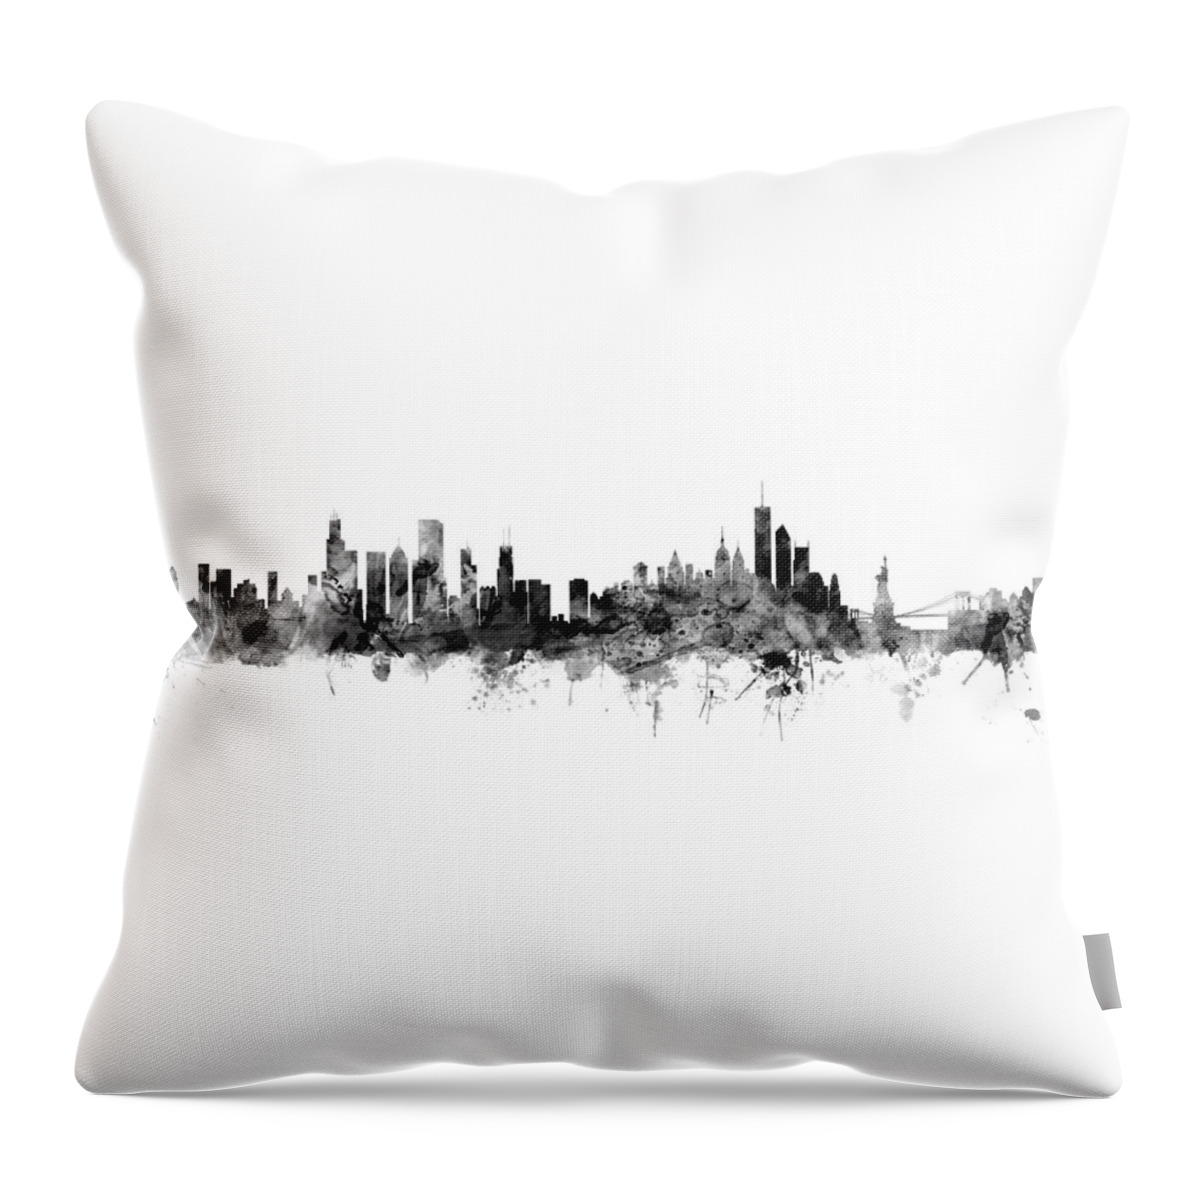 United States Throw Pillow featuring the digital art Chicago and New York City Skylines Mashup by Michael Tompsett